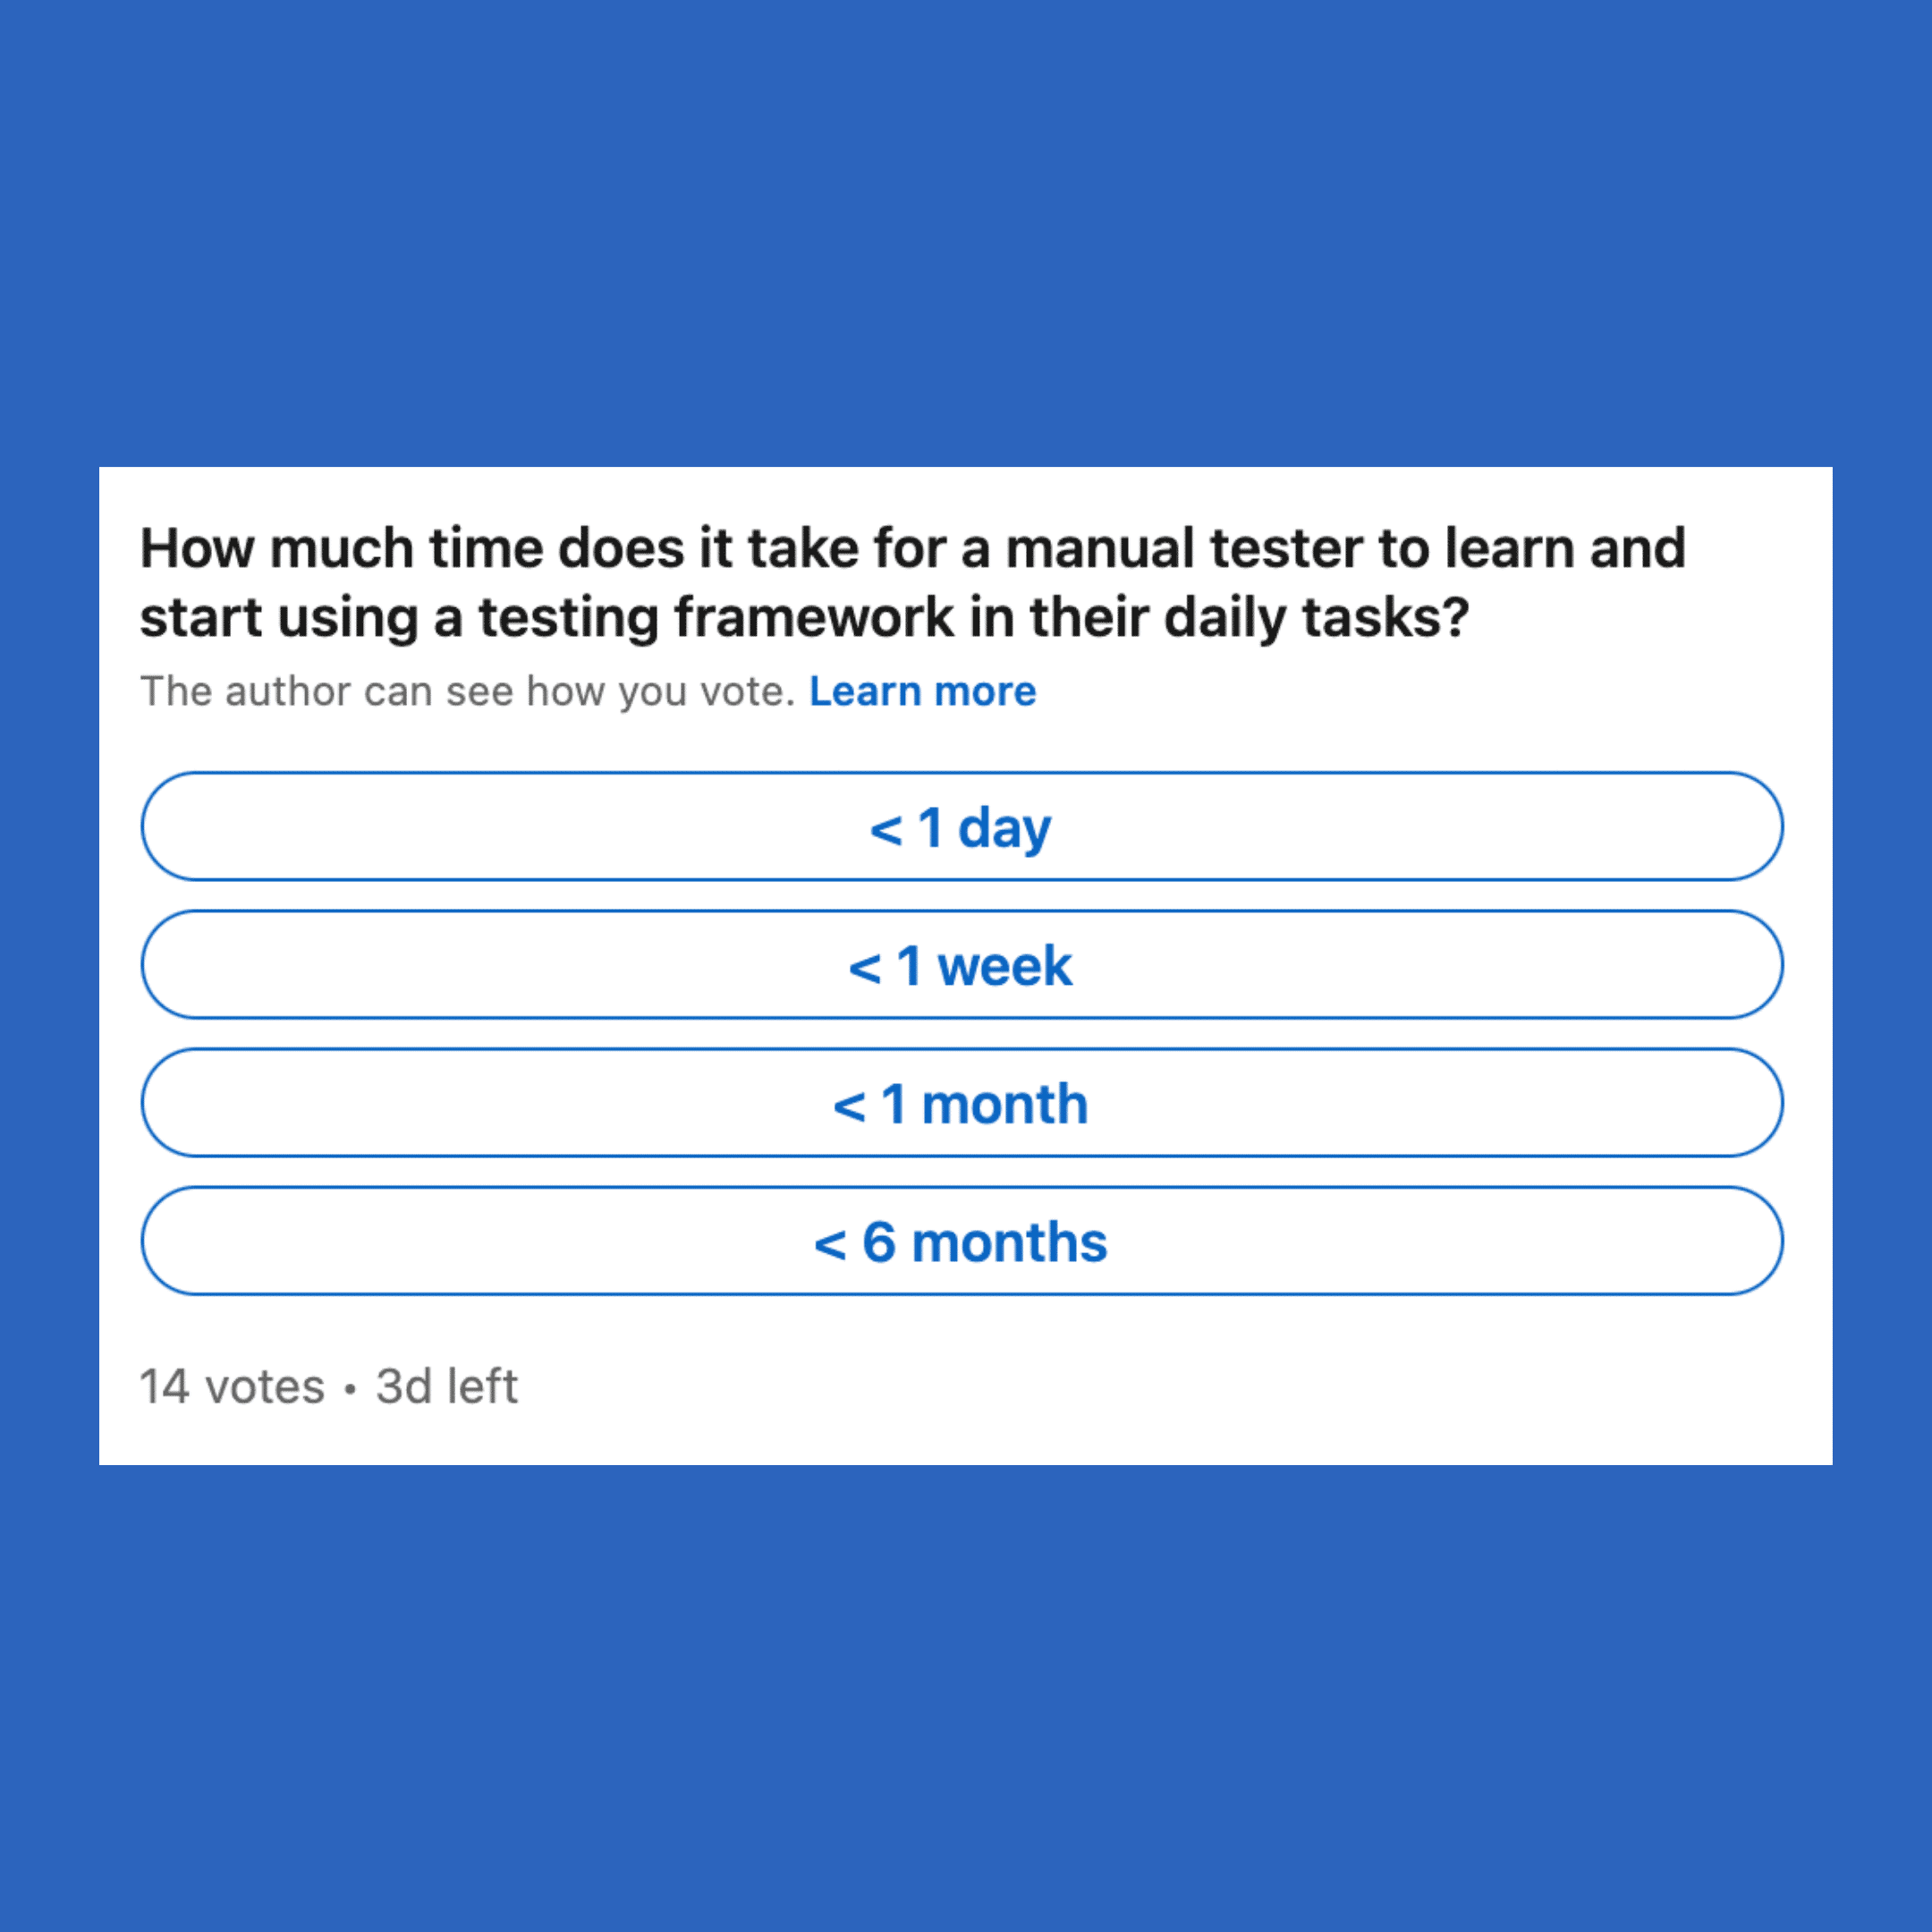 How much time does it take for a manual tester to learn and start using a testing framework in their daily tasks